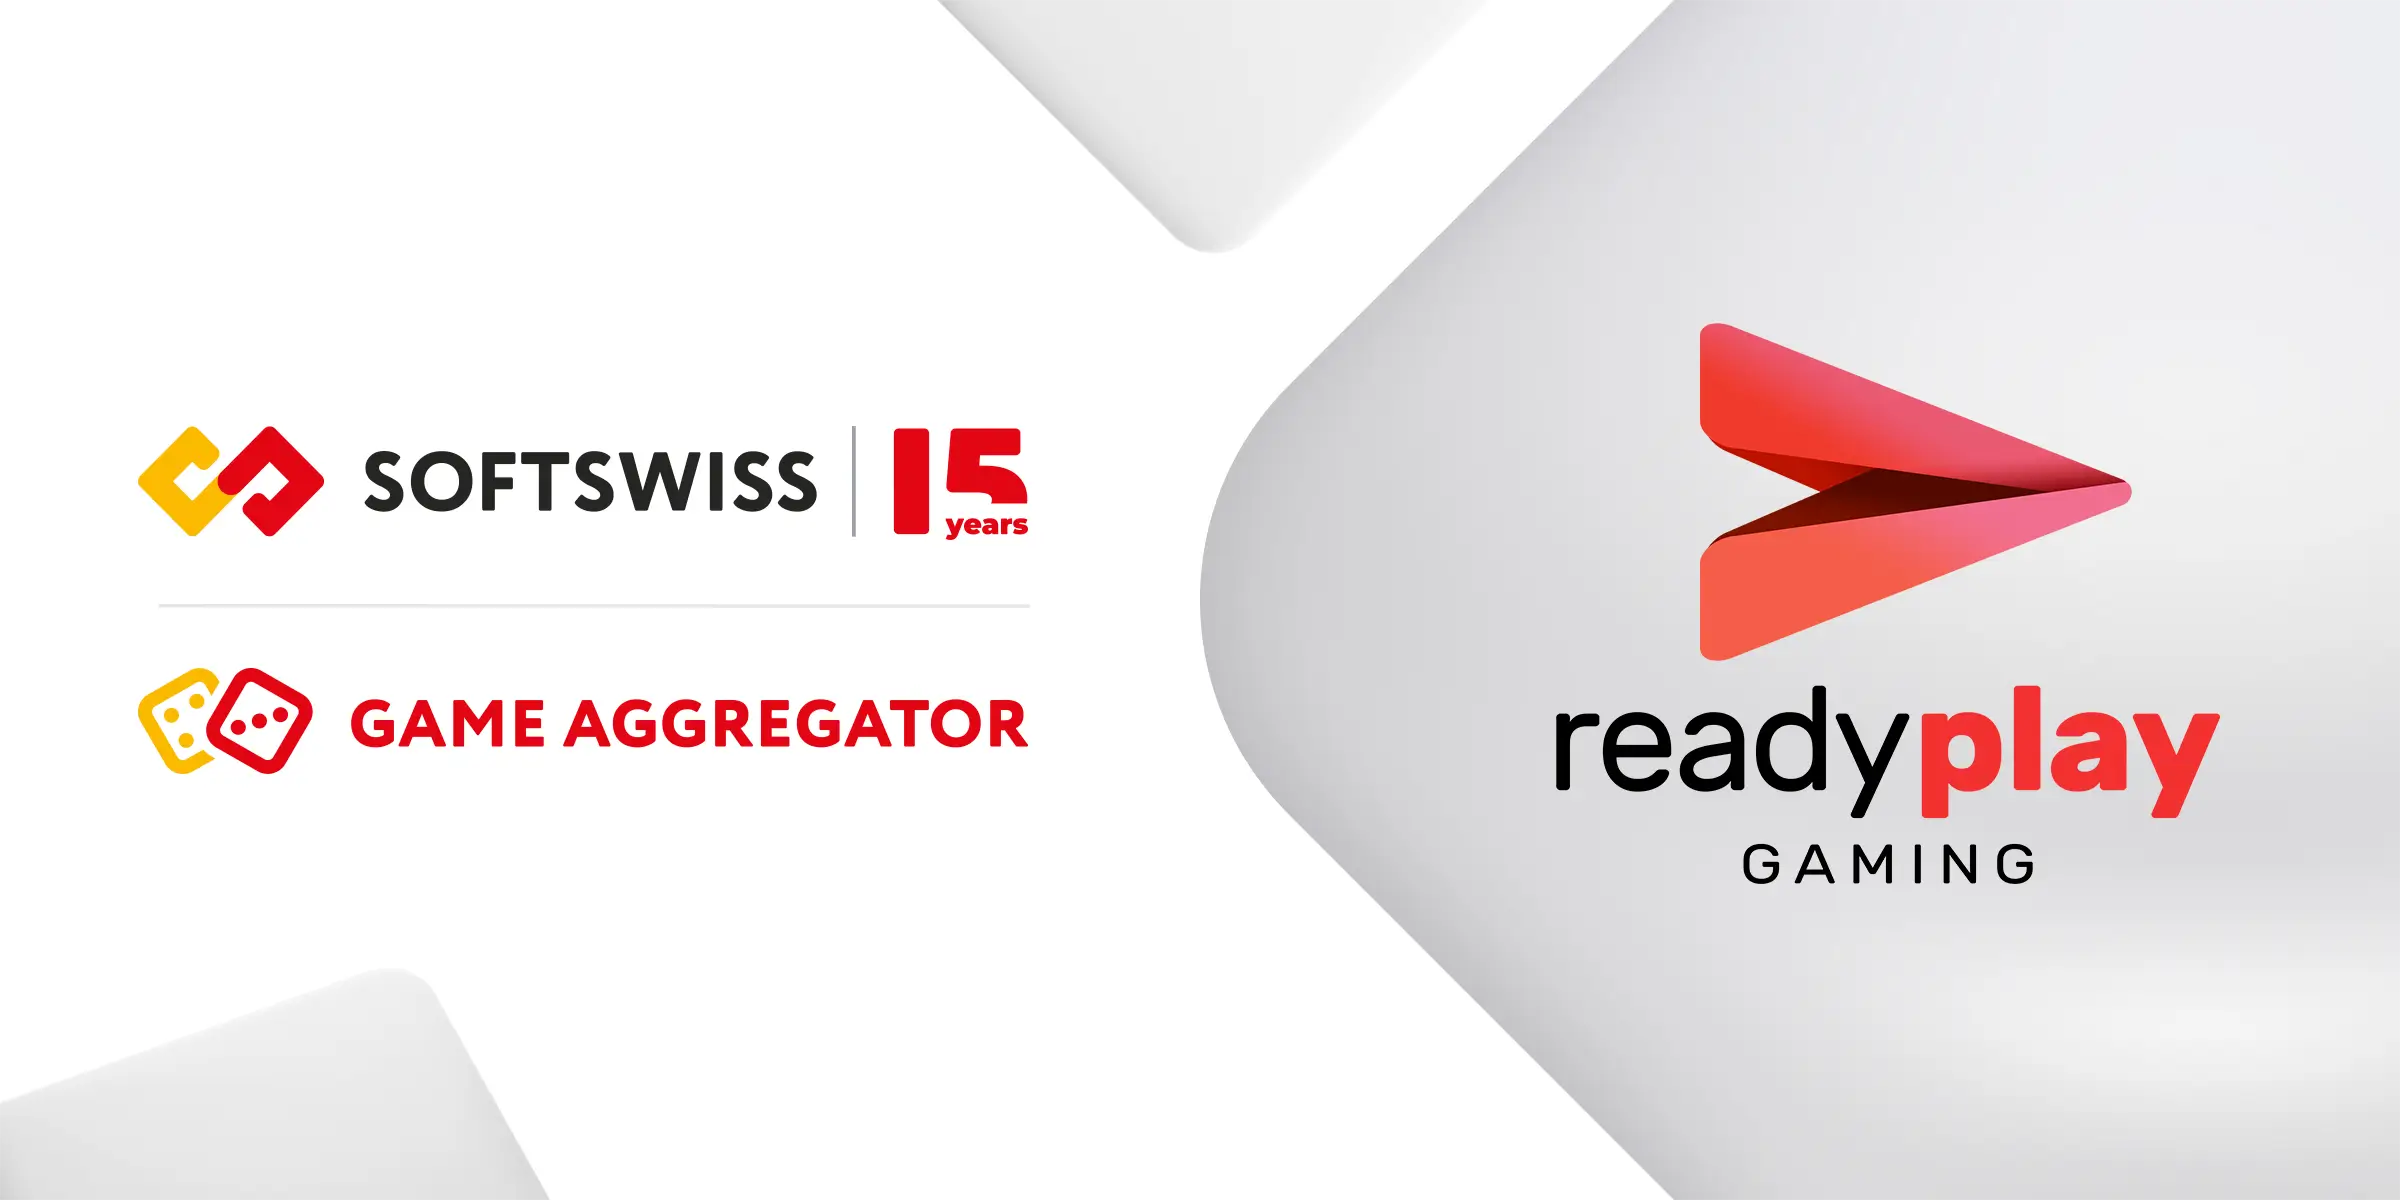 SOFTSWISS Game Aggregator Partners with Ready Play